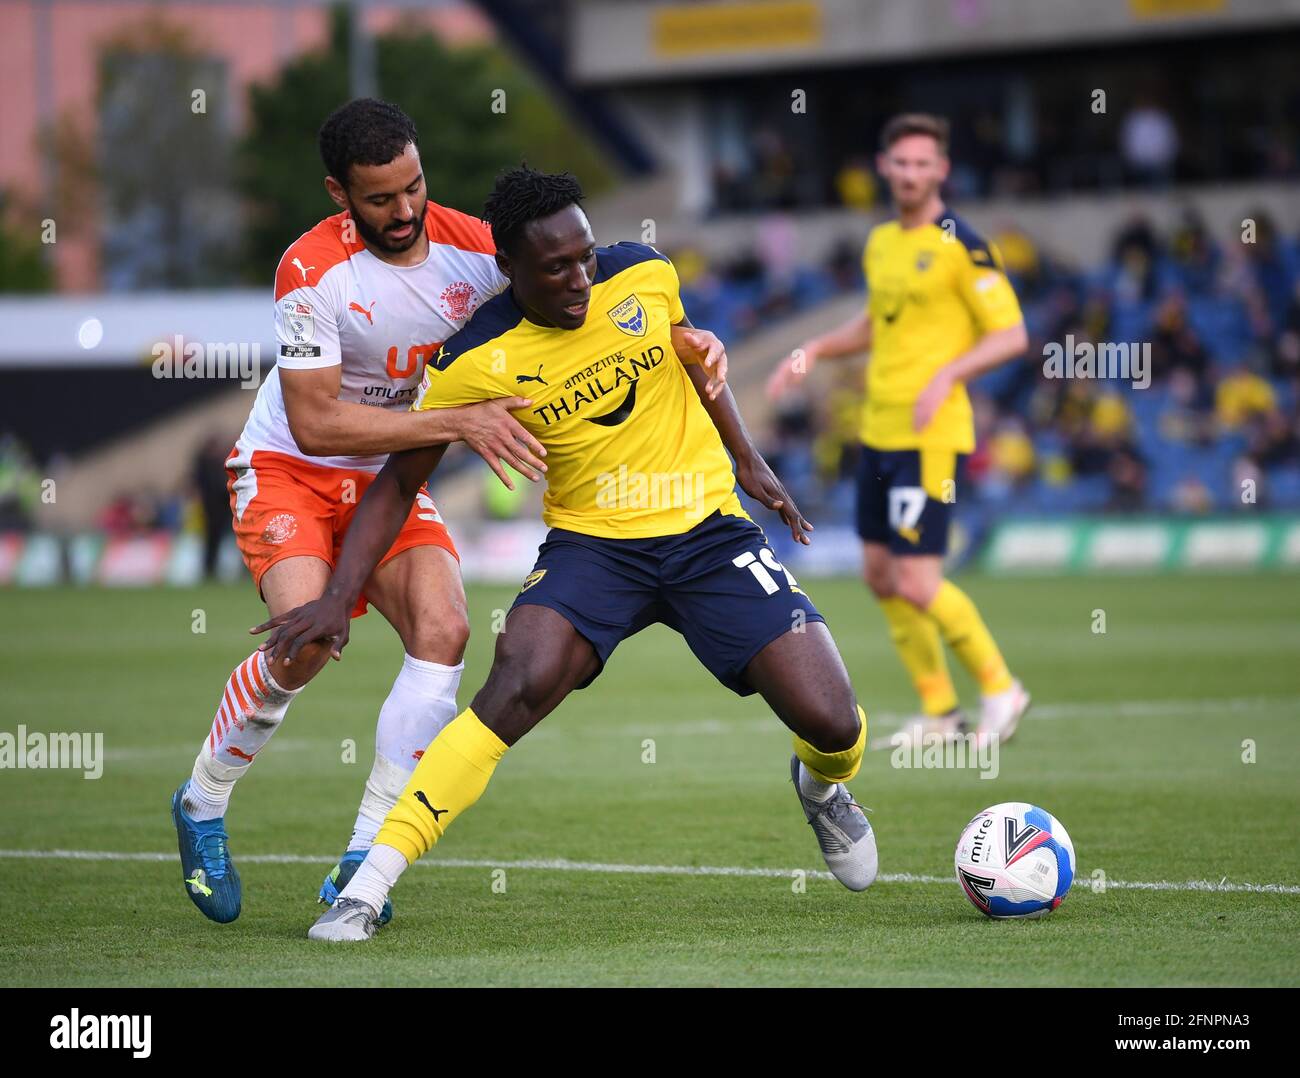 Kassam Stadium, Oxford, Oxfordshire, Royaume-Uni. 18 mai 2021. Football League One, Playoff; Oxford United versus Blackpool; Daniel Agyei d'Oxford United détient Kevin Stewart de Blackpool Credit: Action plus Sports/Alay Live News Banque D'Images